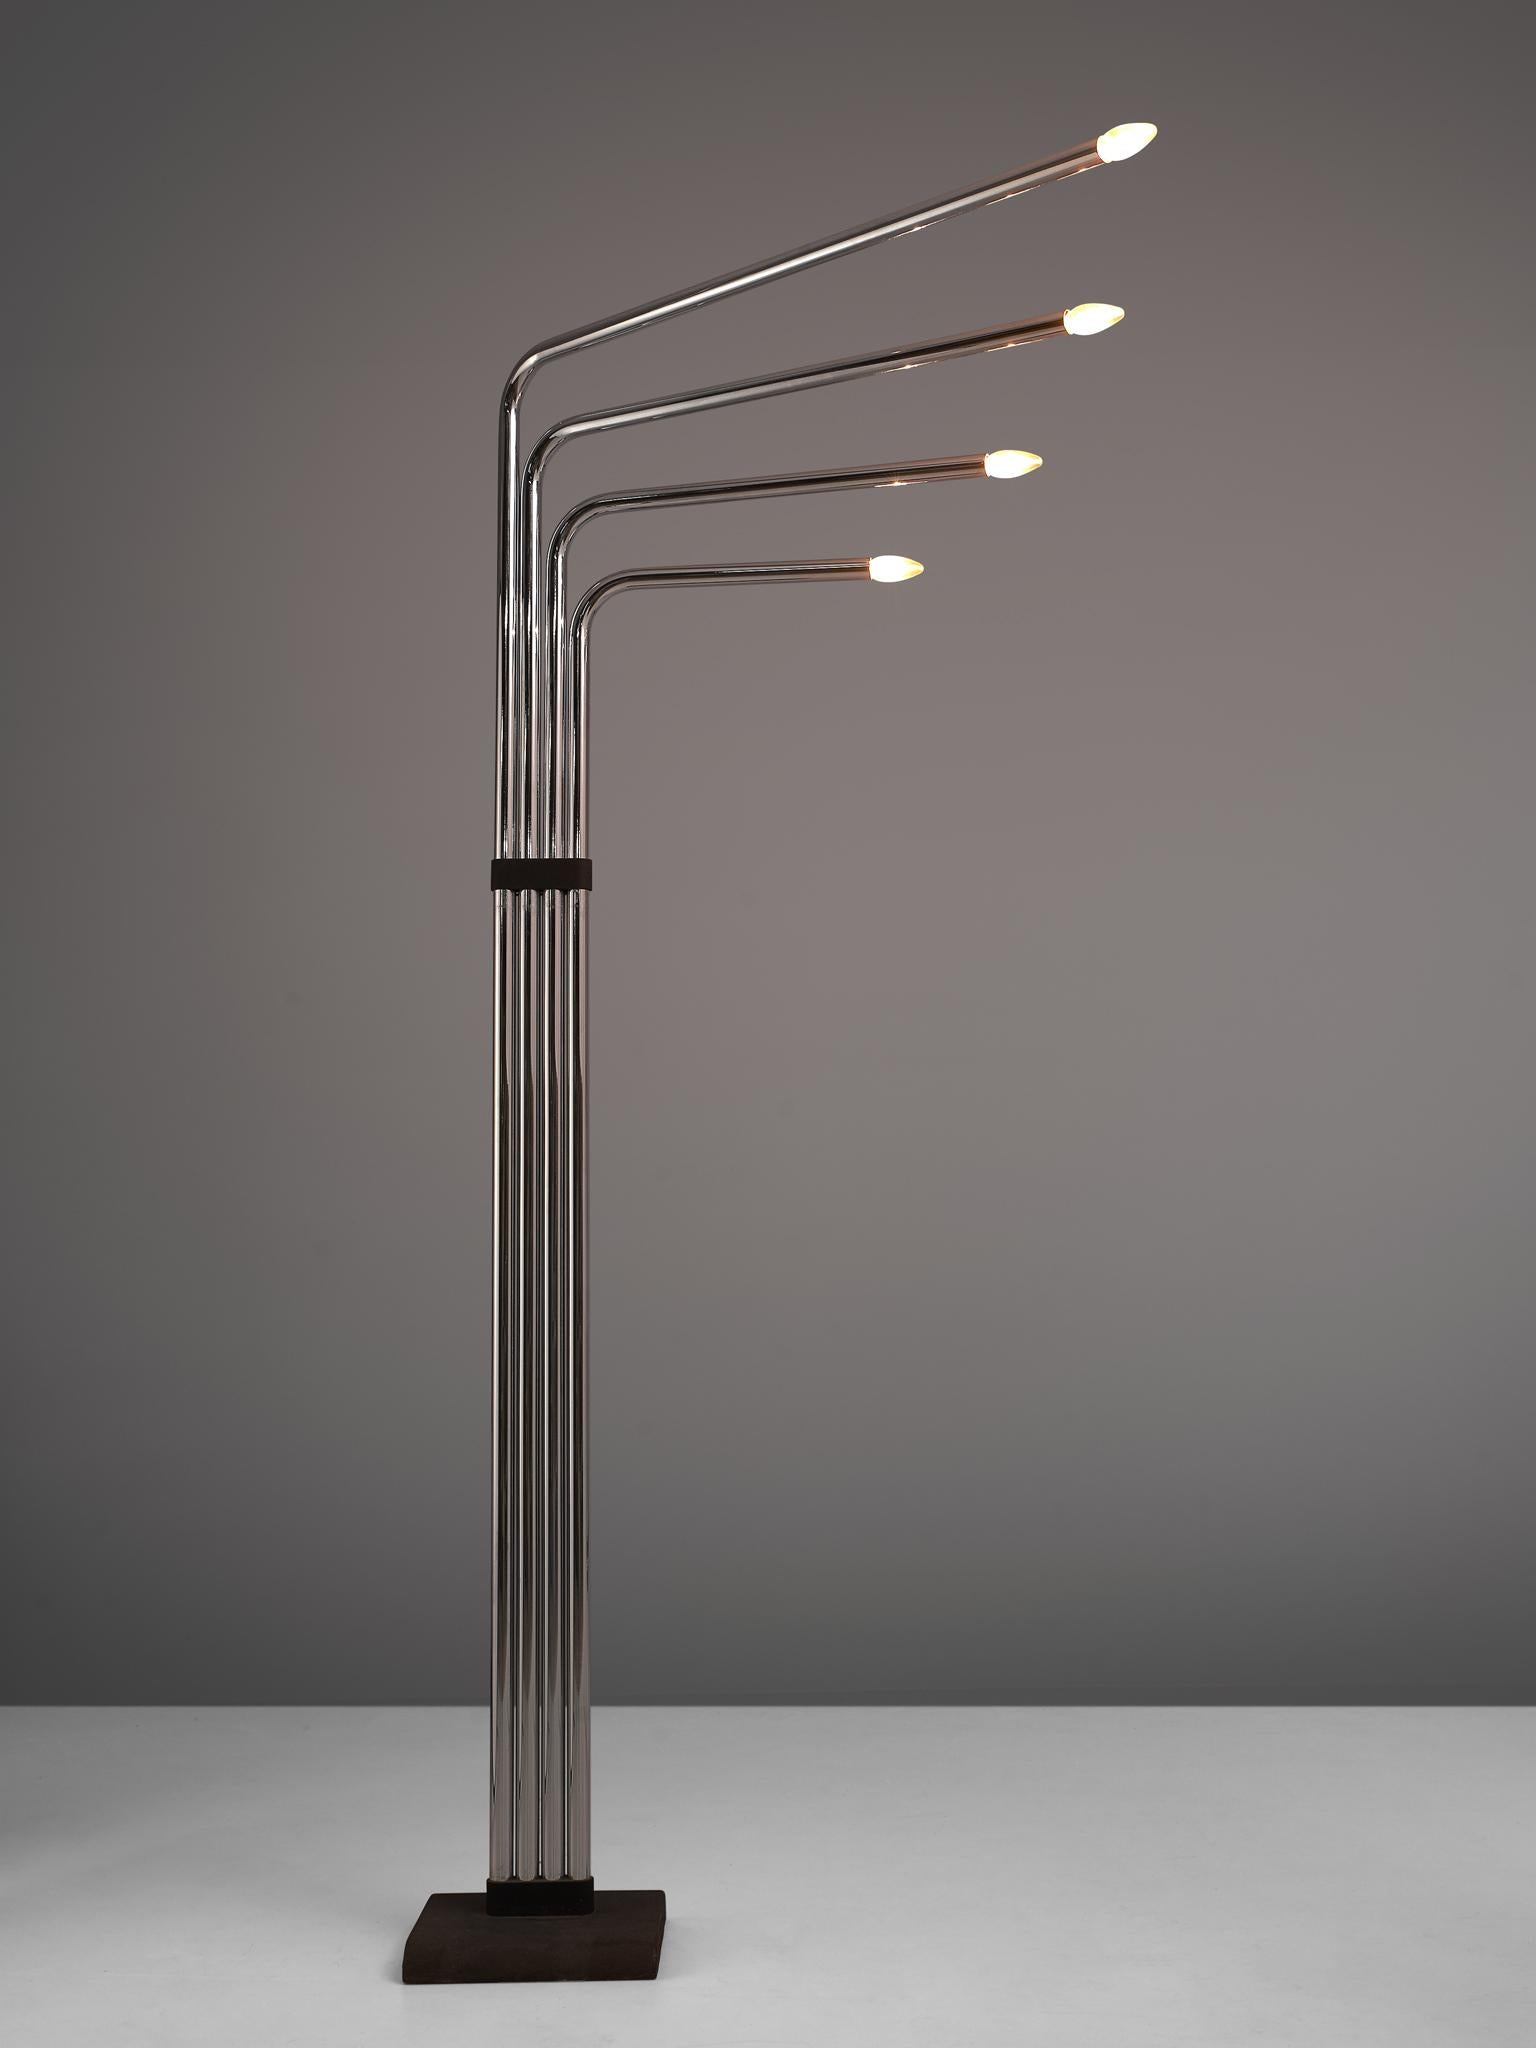 Goffredo Reggiani, floor lamp, chromed steel, Italy, 1970s

Architectural floor lamp with four tubular arms by Reggiani. Each of the four chrome tubes bents at different heights with 90 degrees and can be rotated individually. Each arm holds a